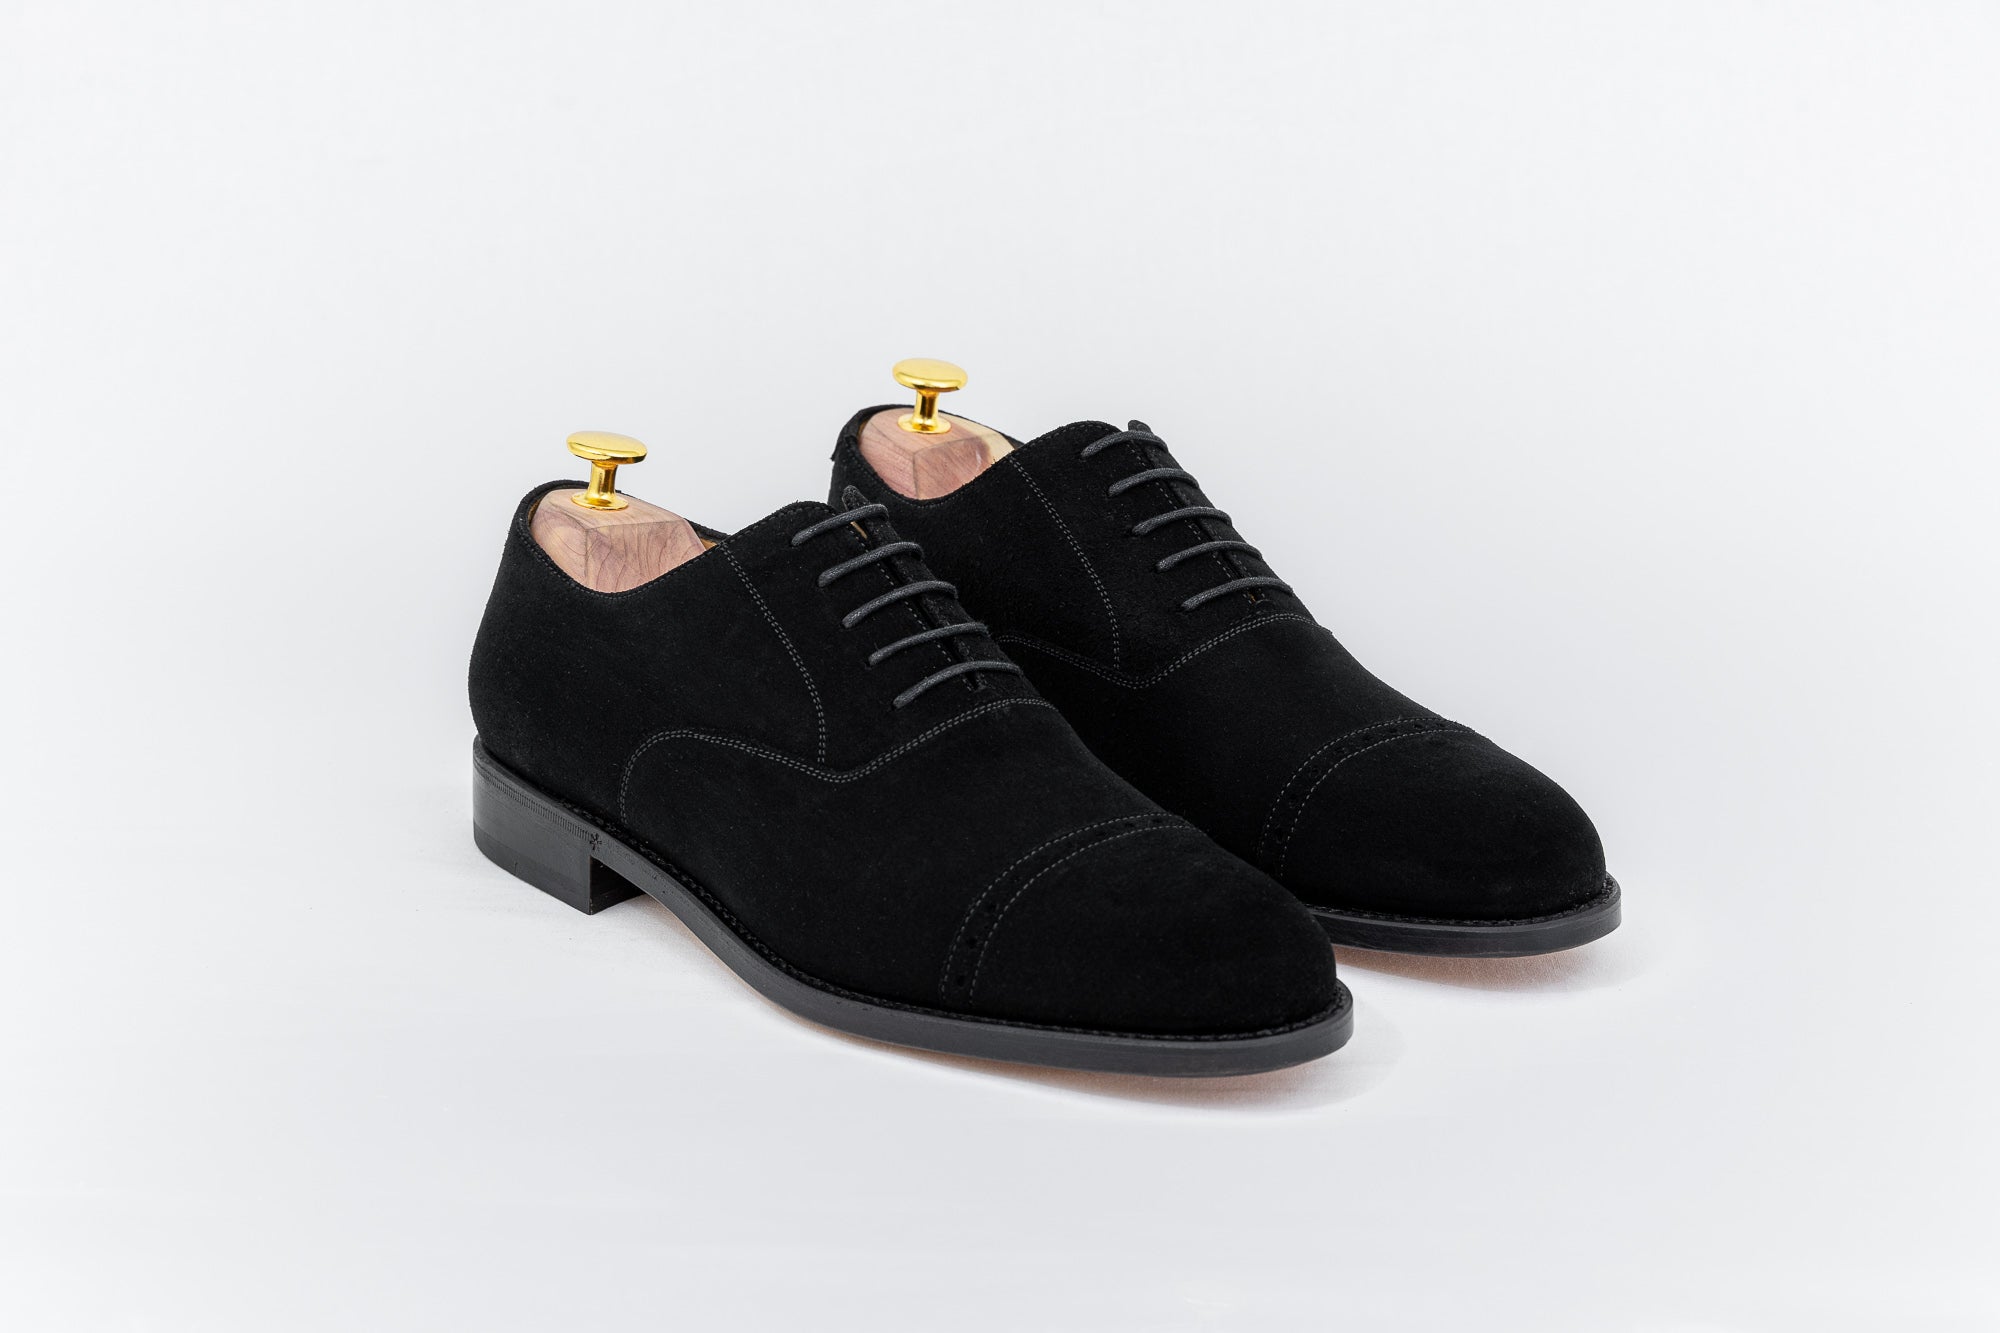 Diplomate richelieu chaussures homme Ypson's Paris – Ypsons